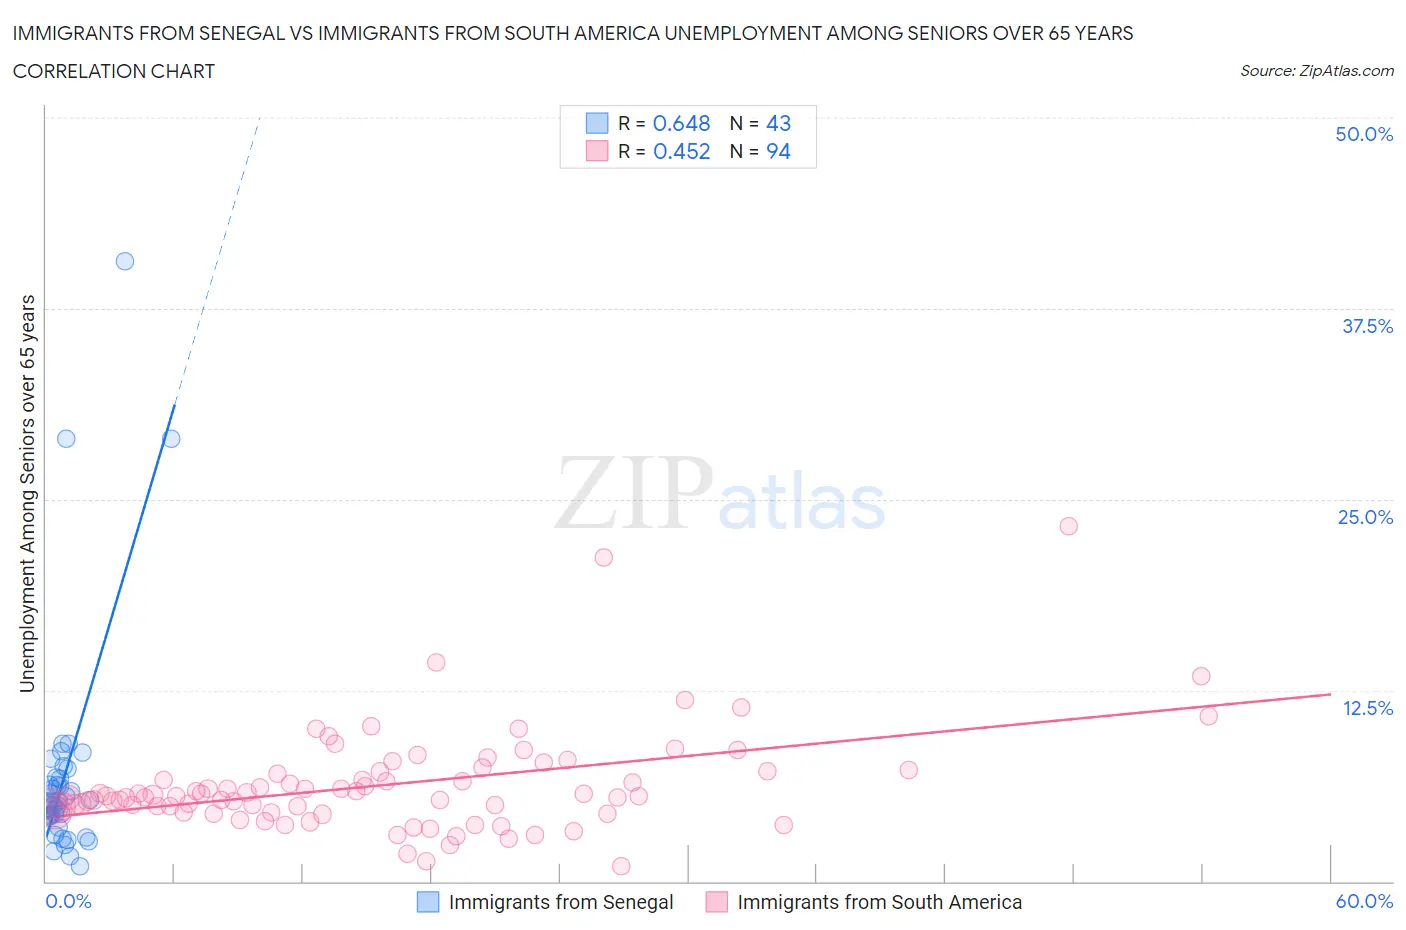 Immigrants from Senegal vs Immigrants from South America Unemployment Among Seniors over 65 years